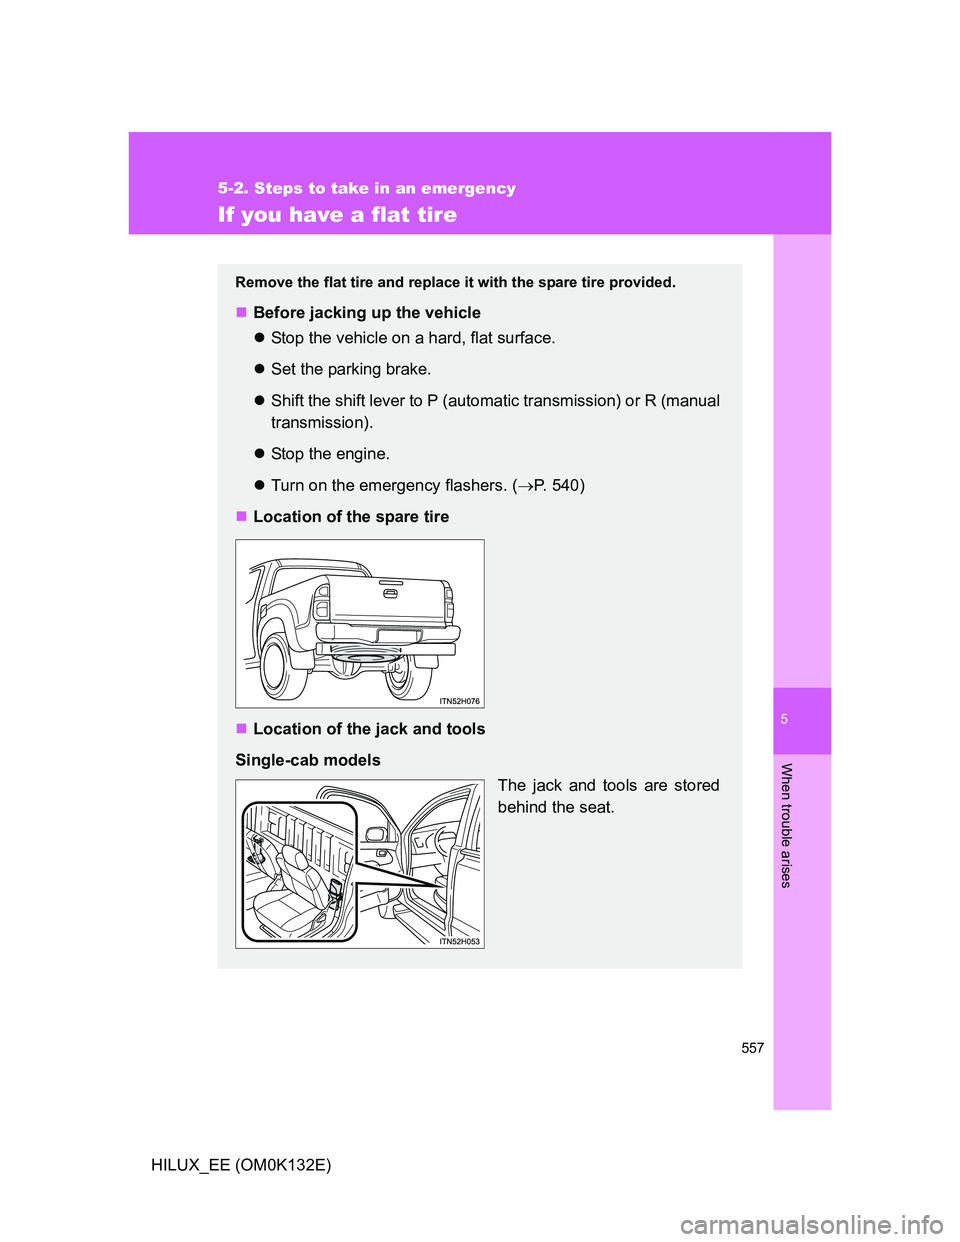 TOYOTA HILUX 2012  Owners Manual (in English) 5
557
5-2. Steps to take in an emergency
When trouble arises
HILUX_EE (OM0K132E)
If you have a flat tire
Remove the flat tire and replace it with the spare tire provided.
Before jacking up the vehi